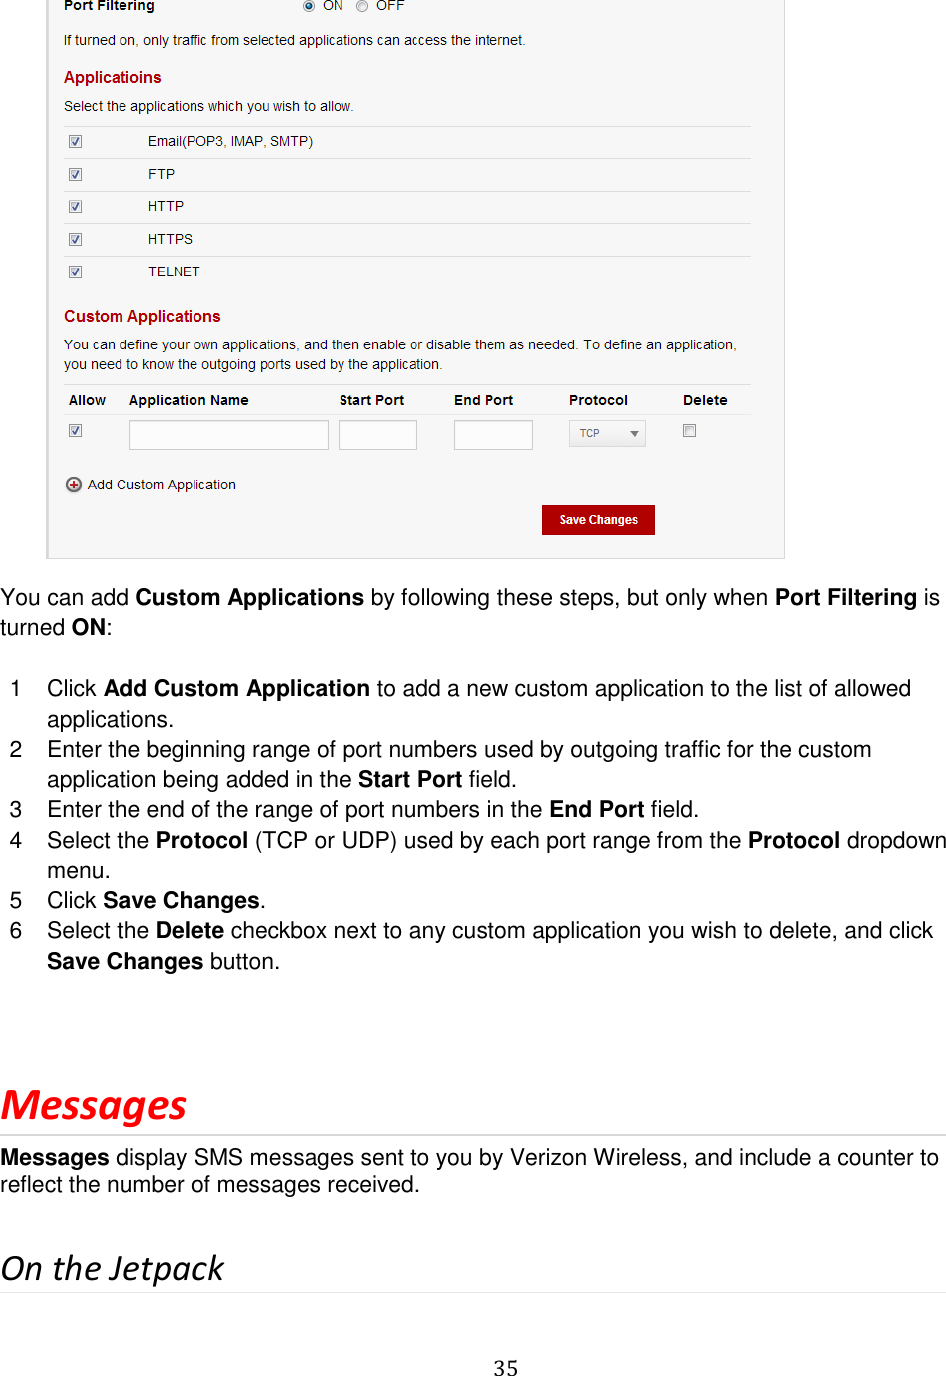   35            You can add Custom Applications by following these steps, but only when Port Filtering is turned ON:  1  Click Add Custom Application to add a new custom application to the list of allowed applications.  2  Enter the beginning range of port numbers used by outgoing traffic for the custom application being added in the Start Port field. 3  Enter the end of the range of port numbers in the End Port field.  4  Select the Protocol (TCP or UDP) used by each port range from the Protocol dropdown menu. 5  Click Save Changes. 6  Select the Delete checkbox next to any custom application you wish to delete, and click Save Changes button.  Messages Messages display SMS messages sent to you by Verizon Wireless, and include a counter to reflect the number of messages received.  On the Jetpack 